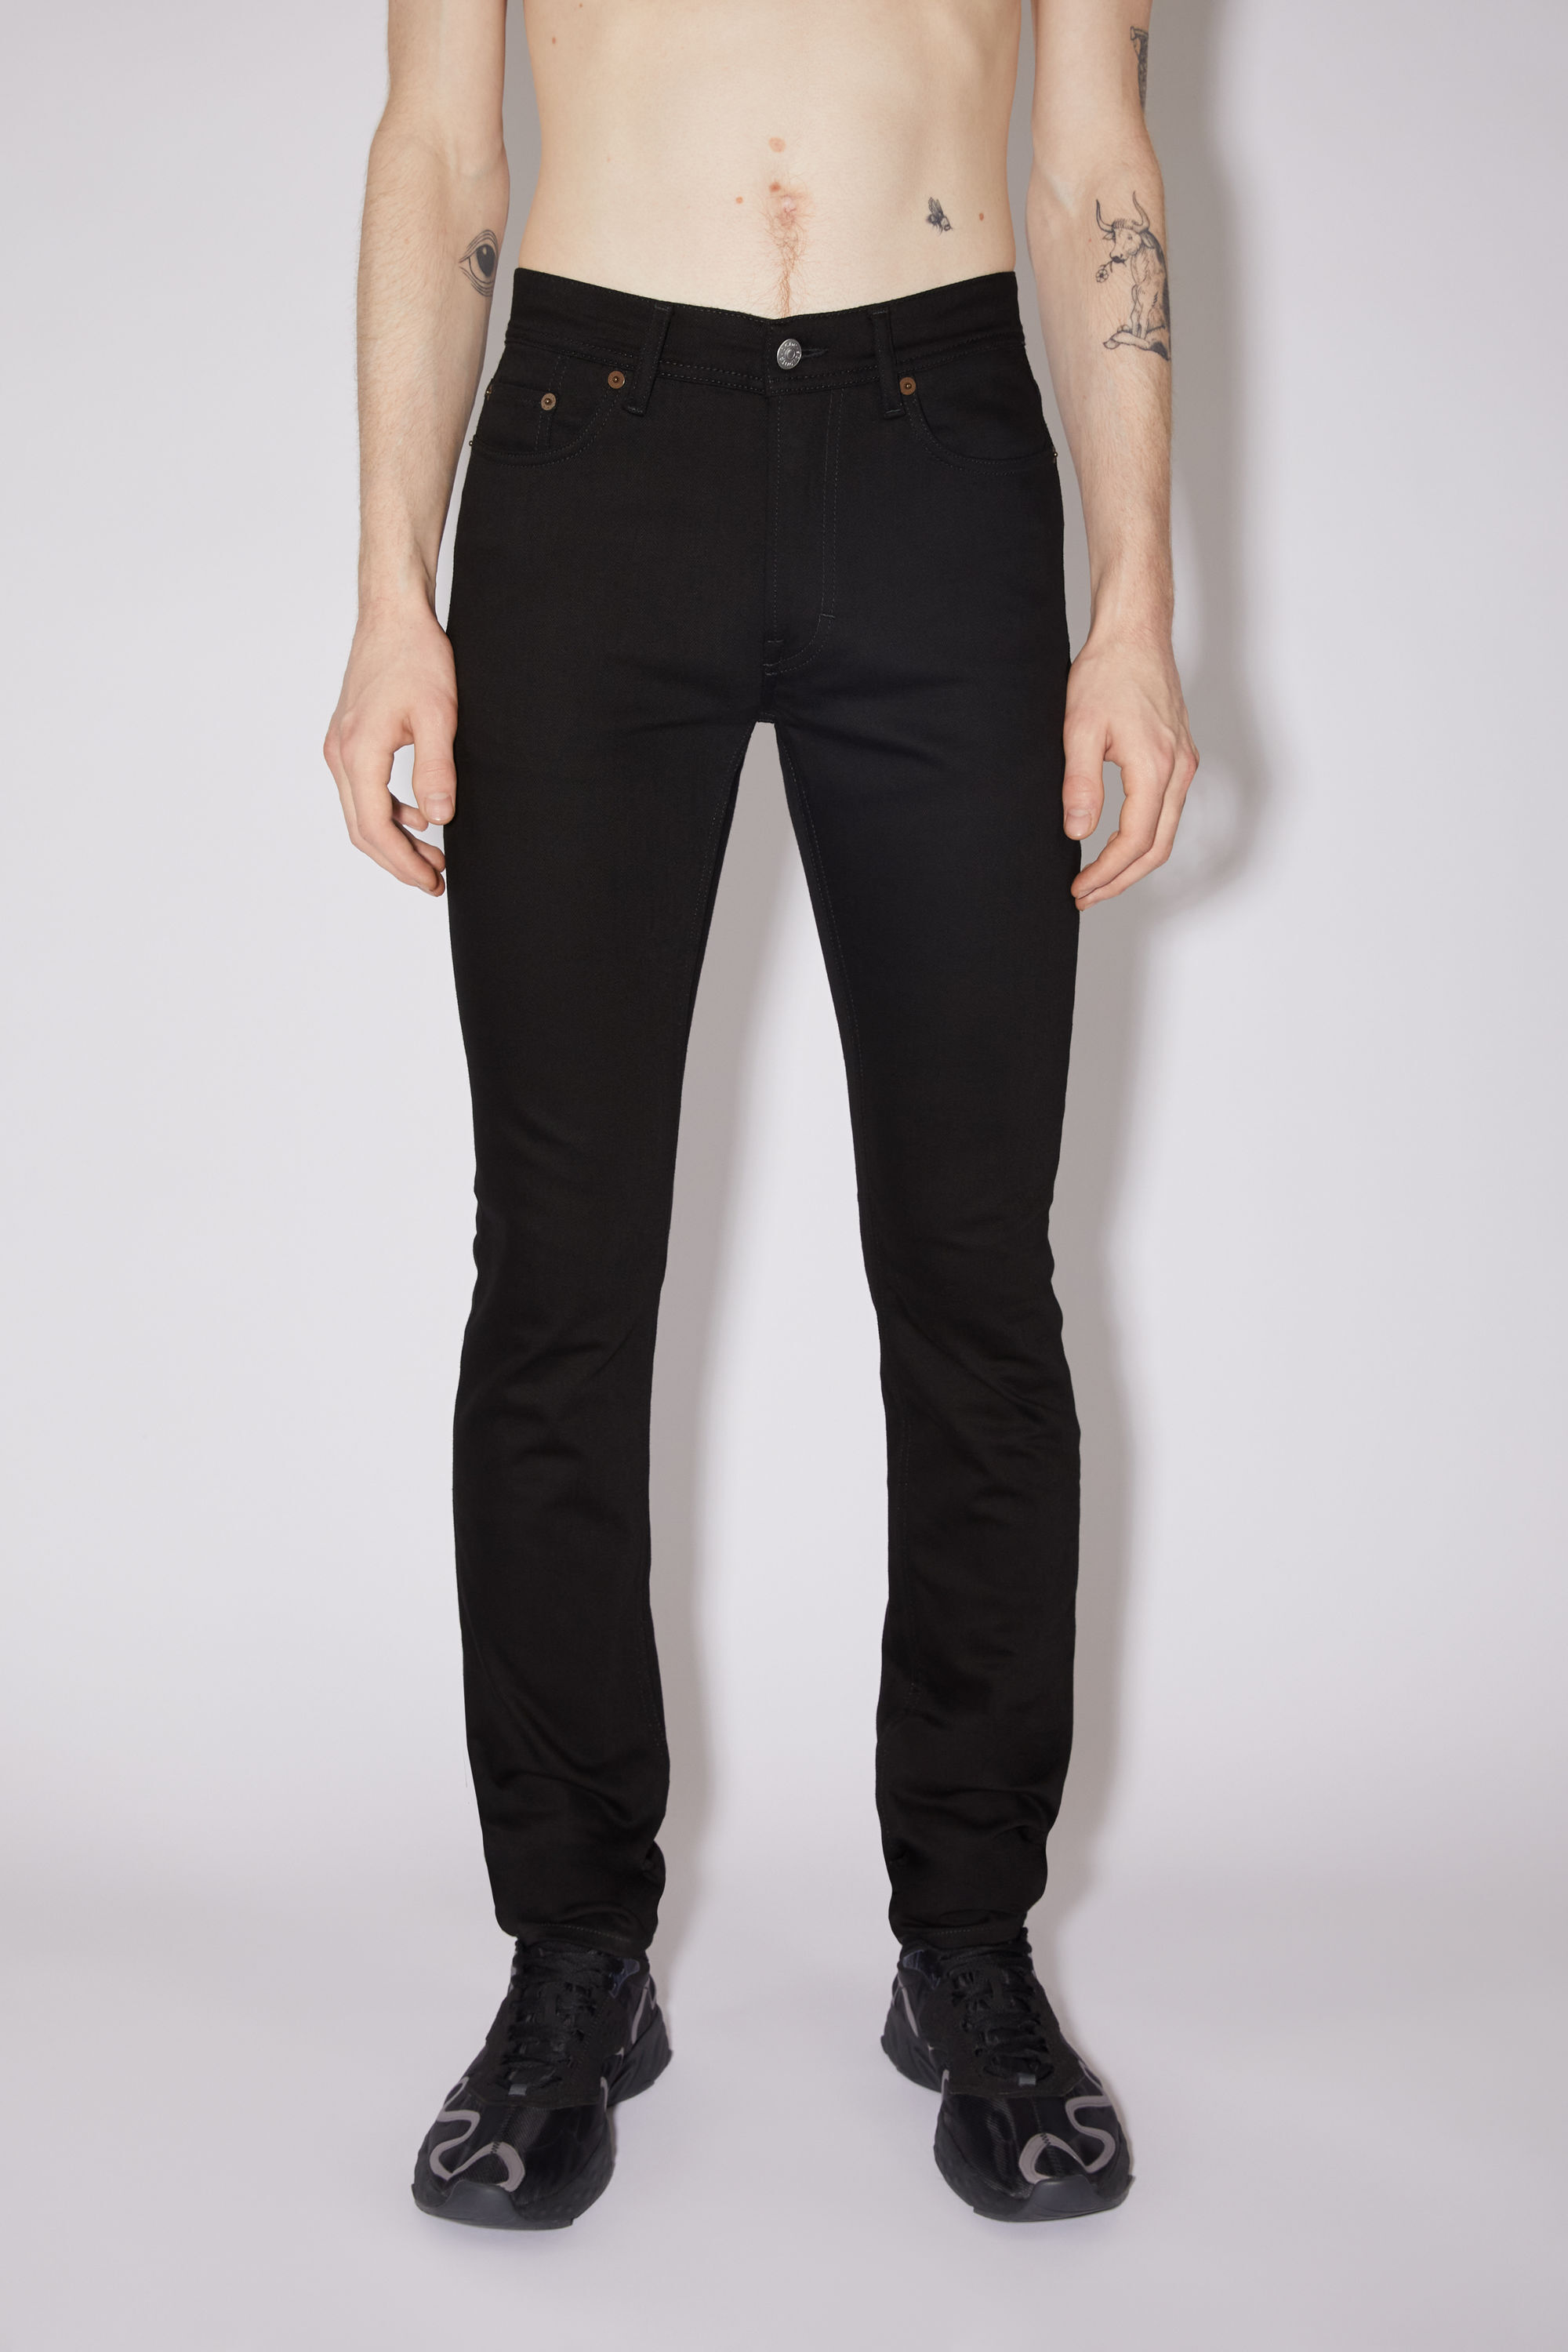 Acne North Skinny Fit Jeans